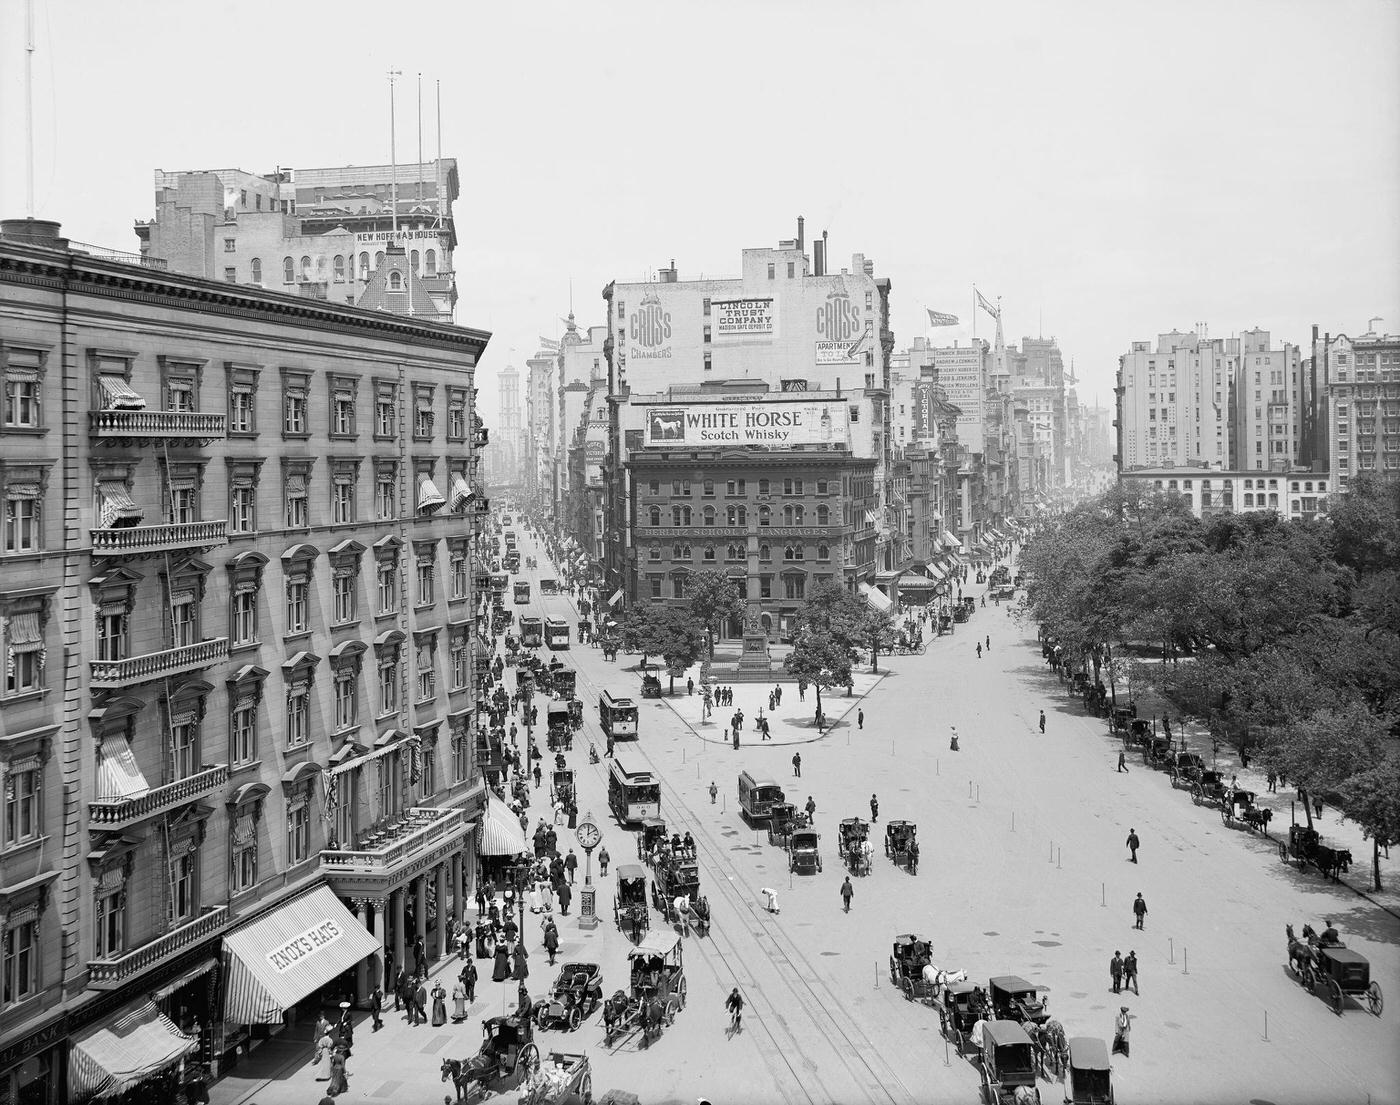 Intersection Of Broadway And Fifth Avenue Looking North, New York City, 1900